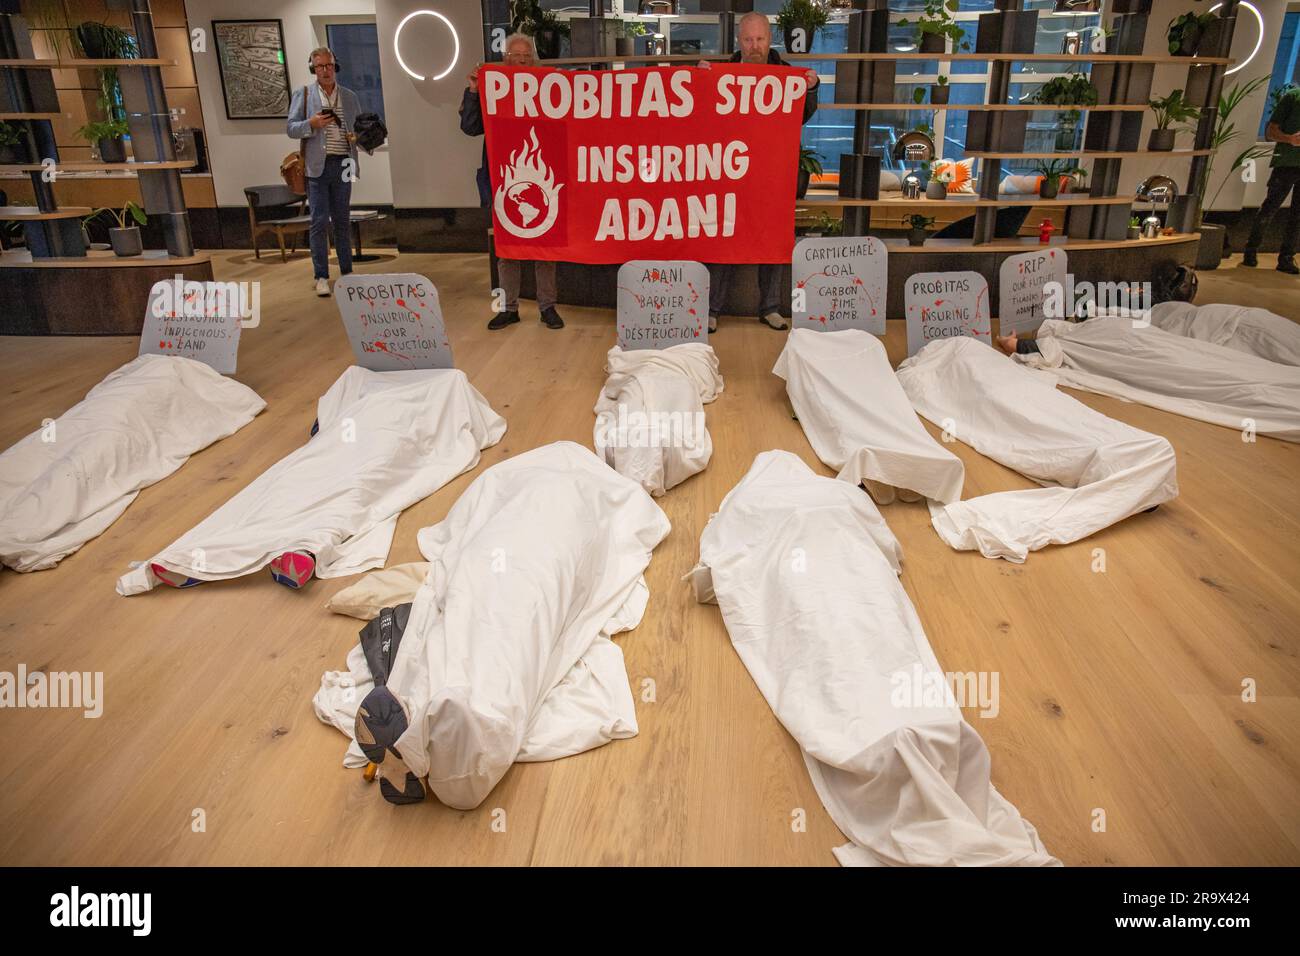 London, England, UK 29 June 2023 A coalition of protesters including Tipping Point Group, Coal Action Network, Stop Adani Group, South Asian Solidarity Network and Extinction Rebellion, hold a die-in at the new offices of Probitas in opposition to their involvement with Adani and the Carmichael coal mine in Australia. The die-in was attended by police but no arrests were made and the protesters left peacefully at 9am. Stock Photo